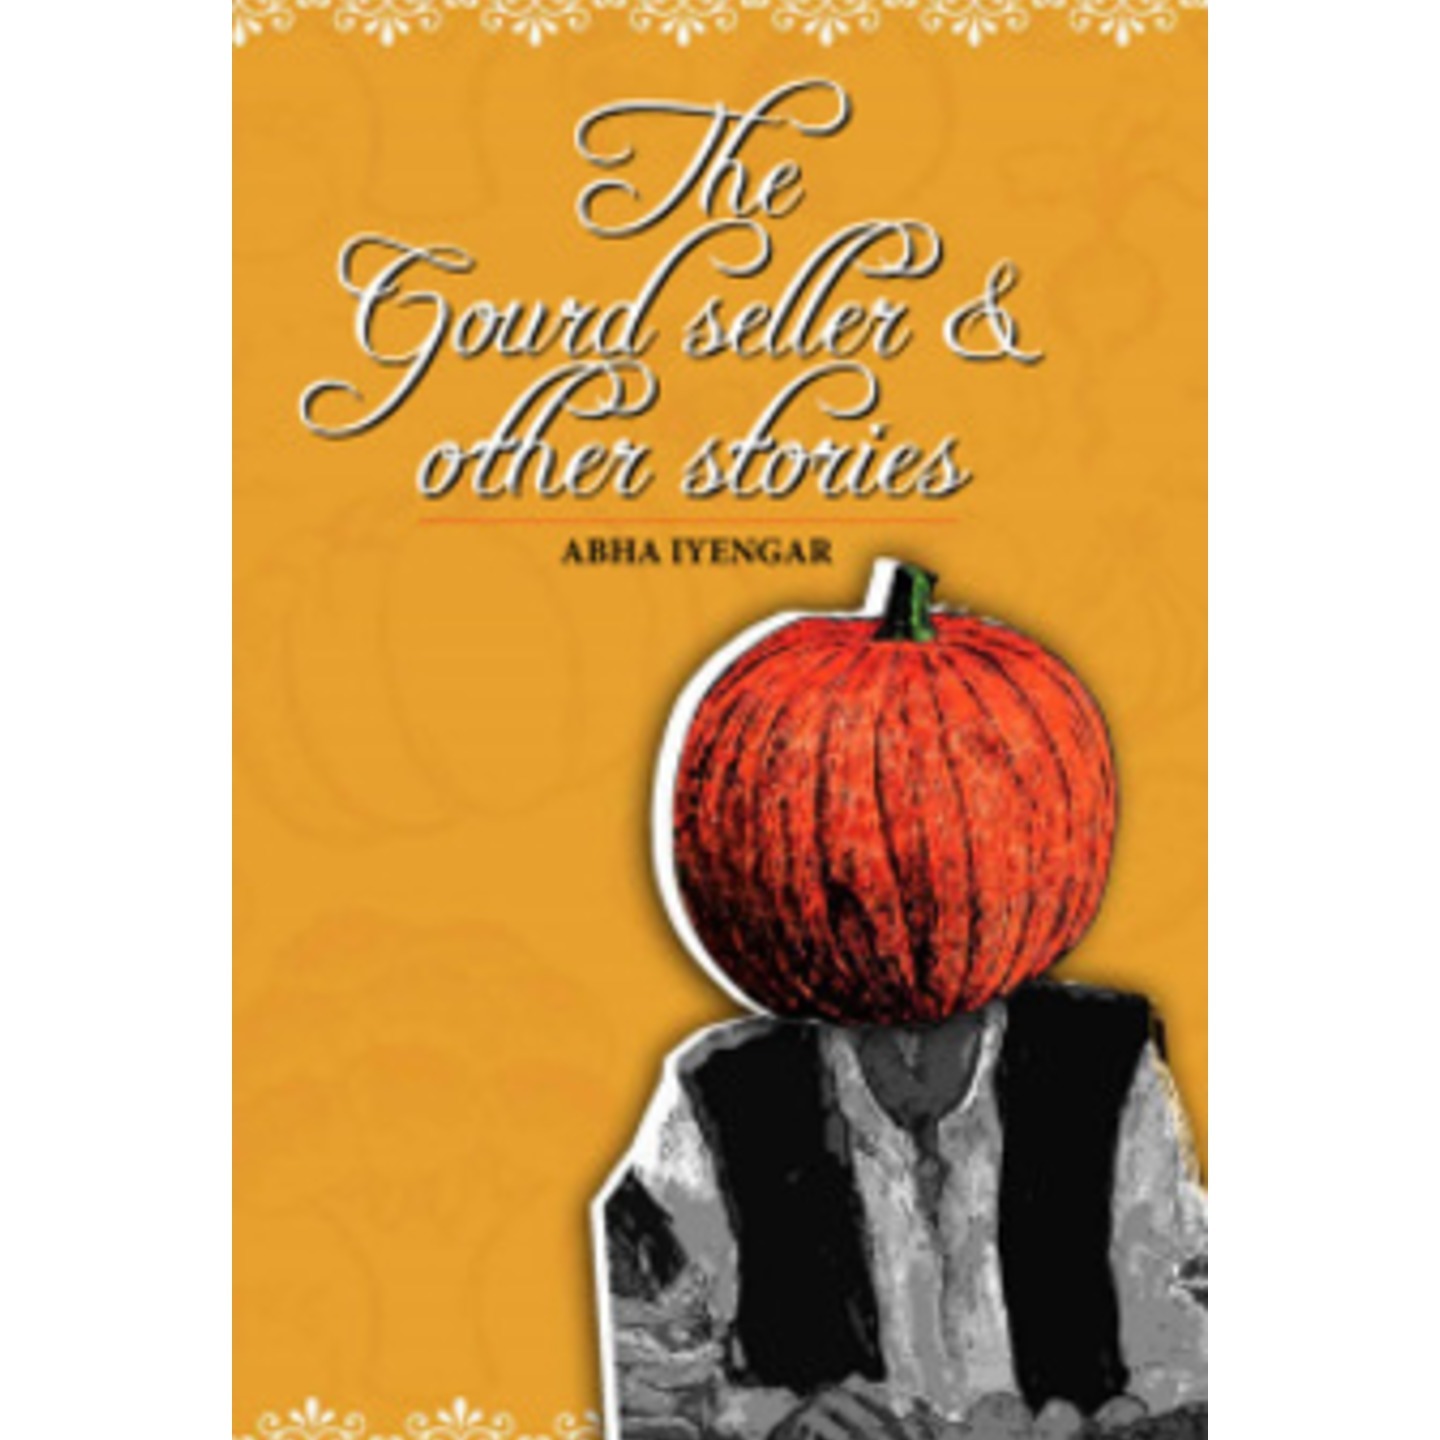 The Gourdseller and Other Stories by Abha Iyengar